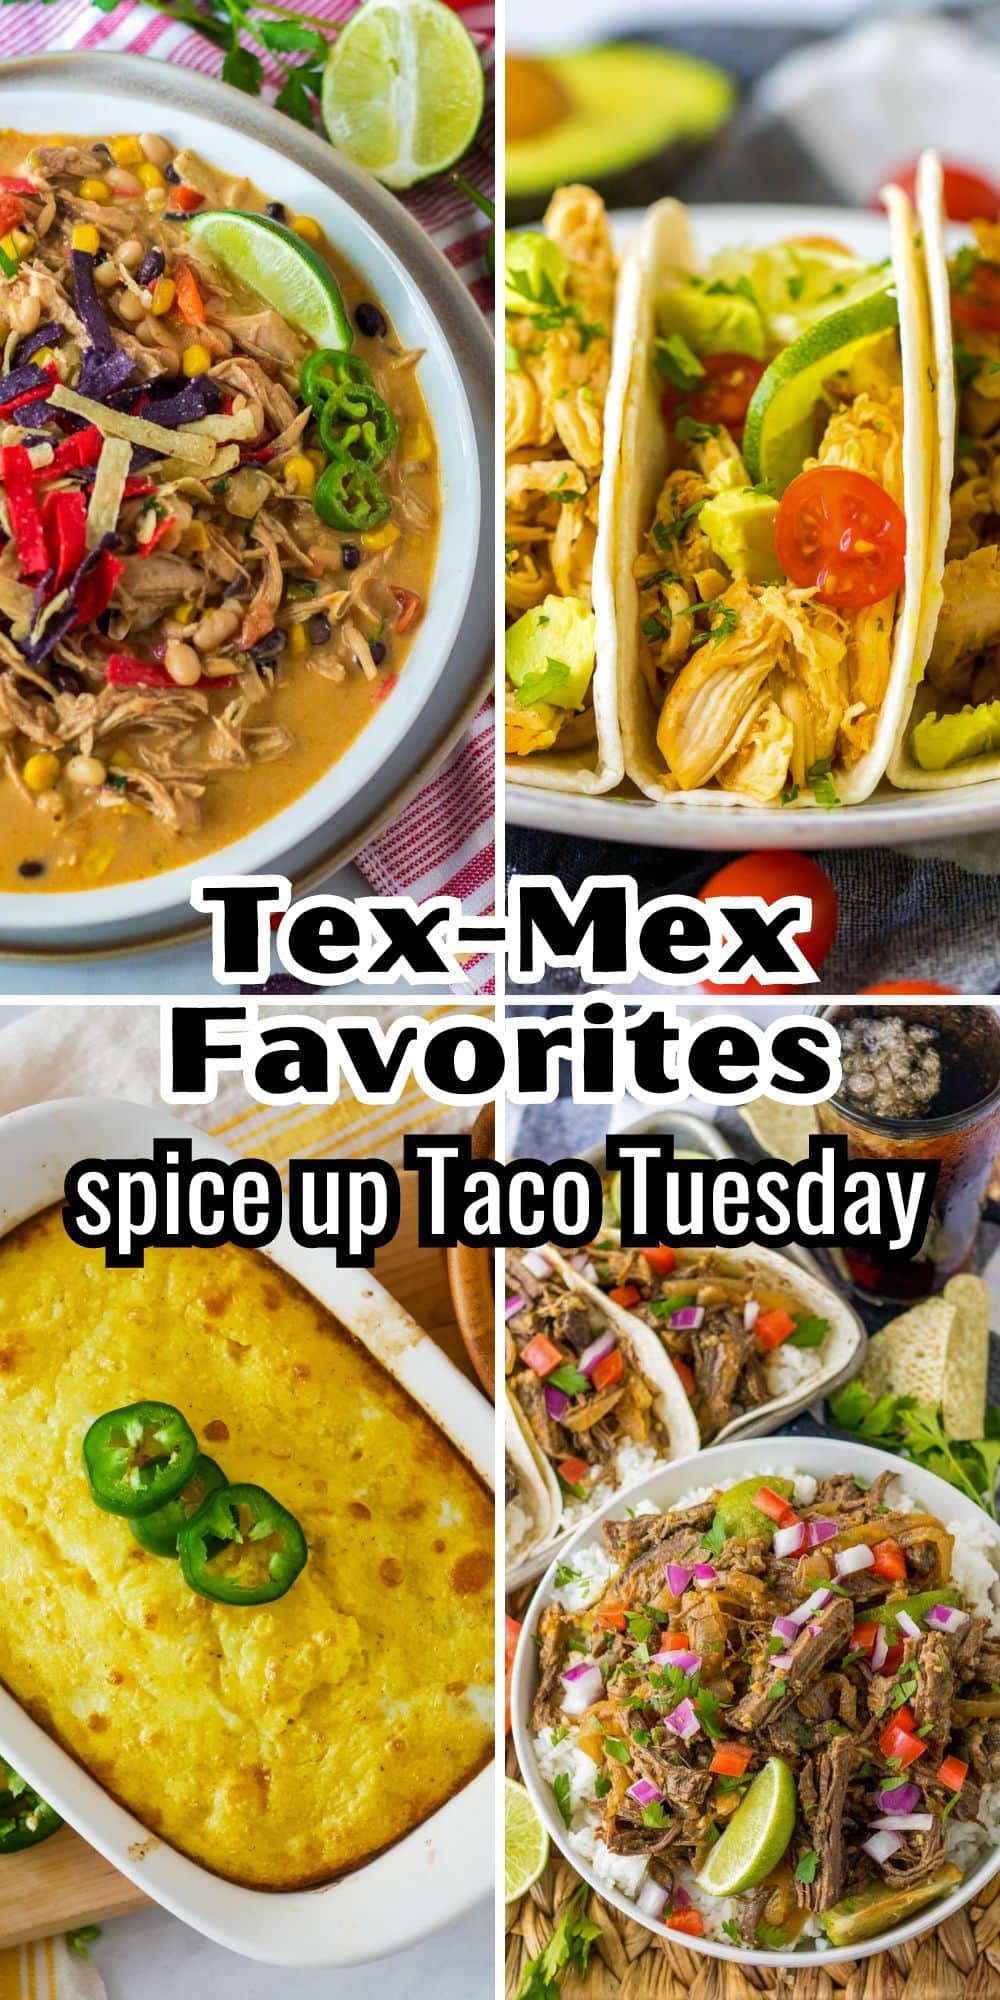 Tex mex favorites spice up taco tuesday.